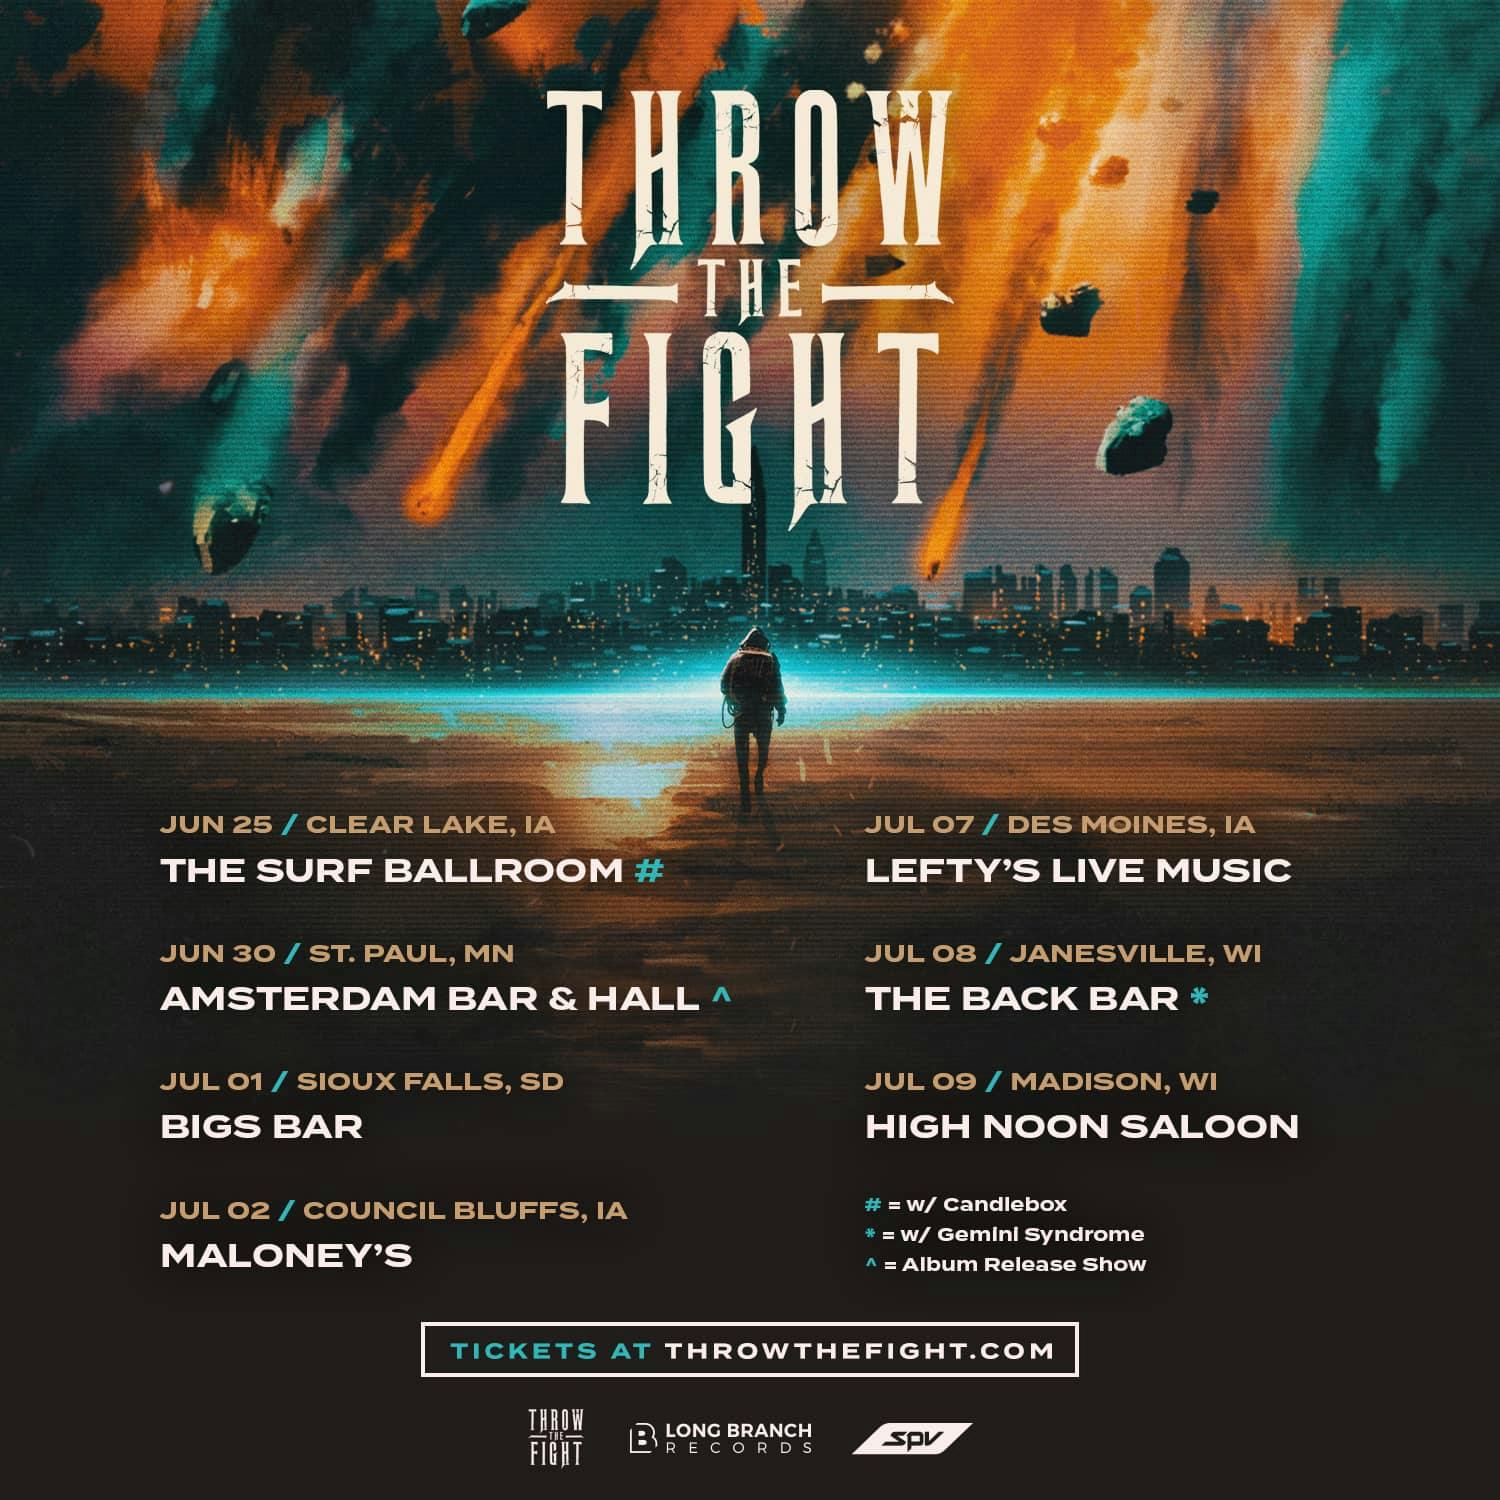 Throw The Fight album release show